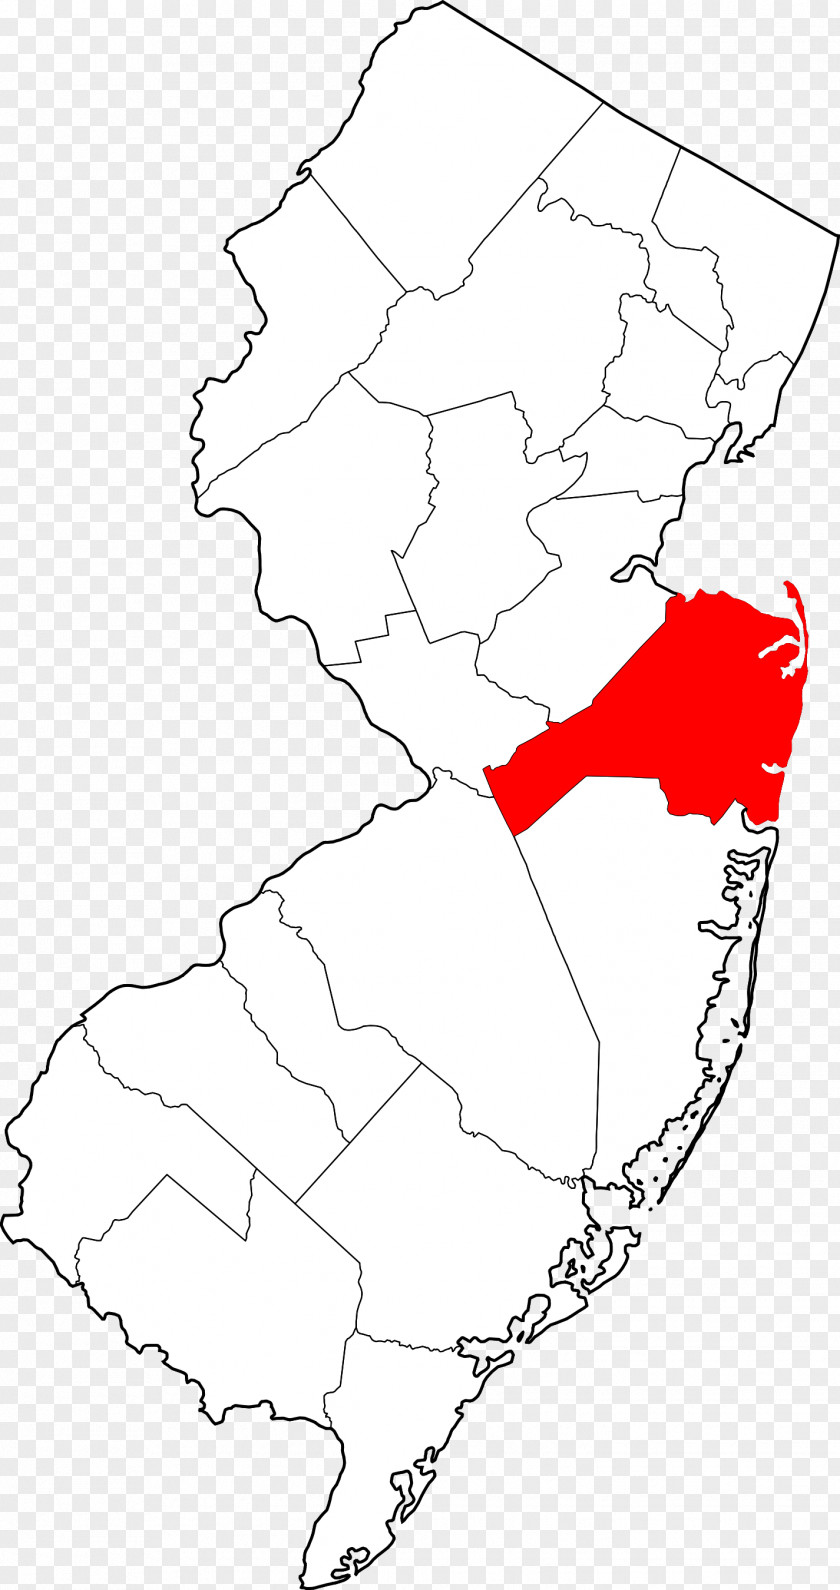 Ocean County Burlington County, New Jersey Middlesex Freehold Township Union PNG